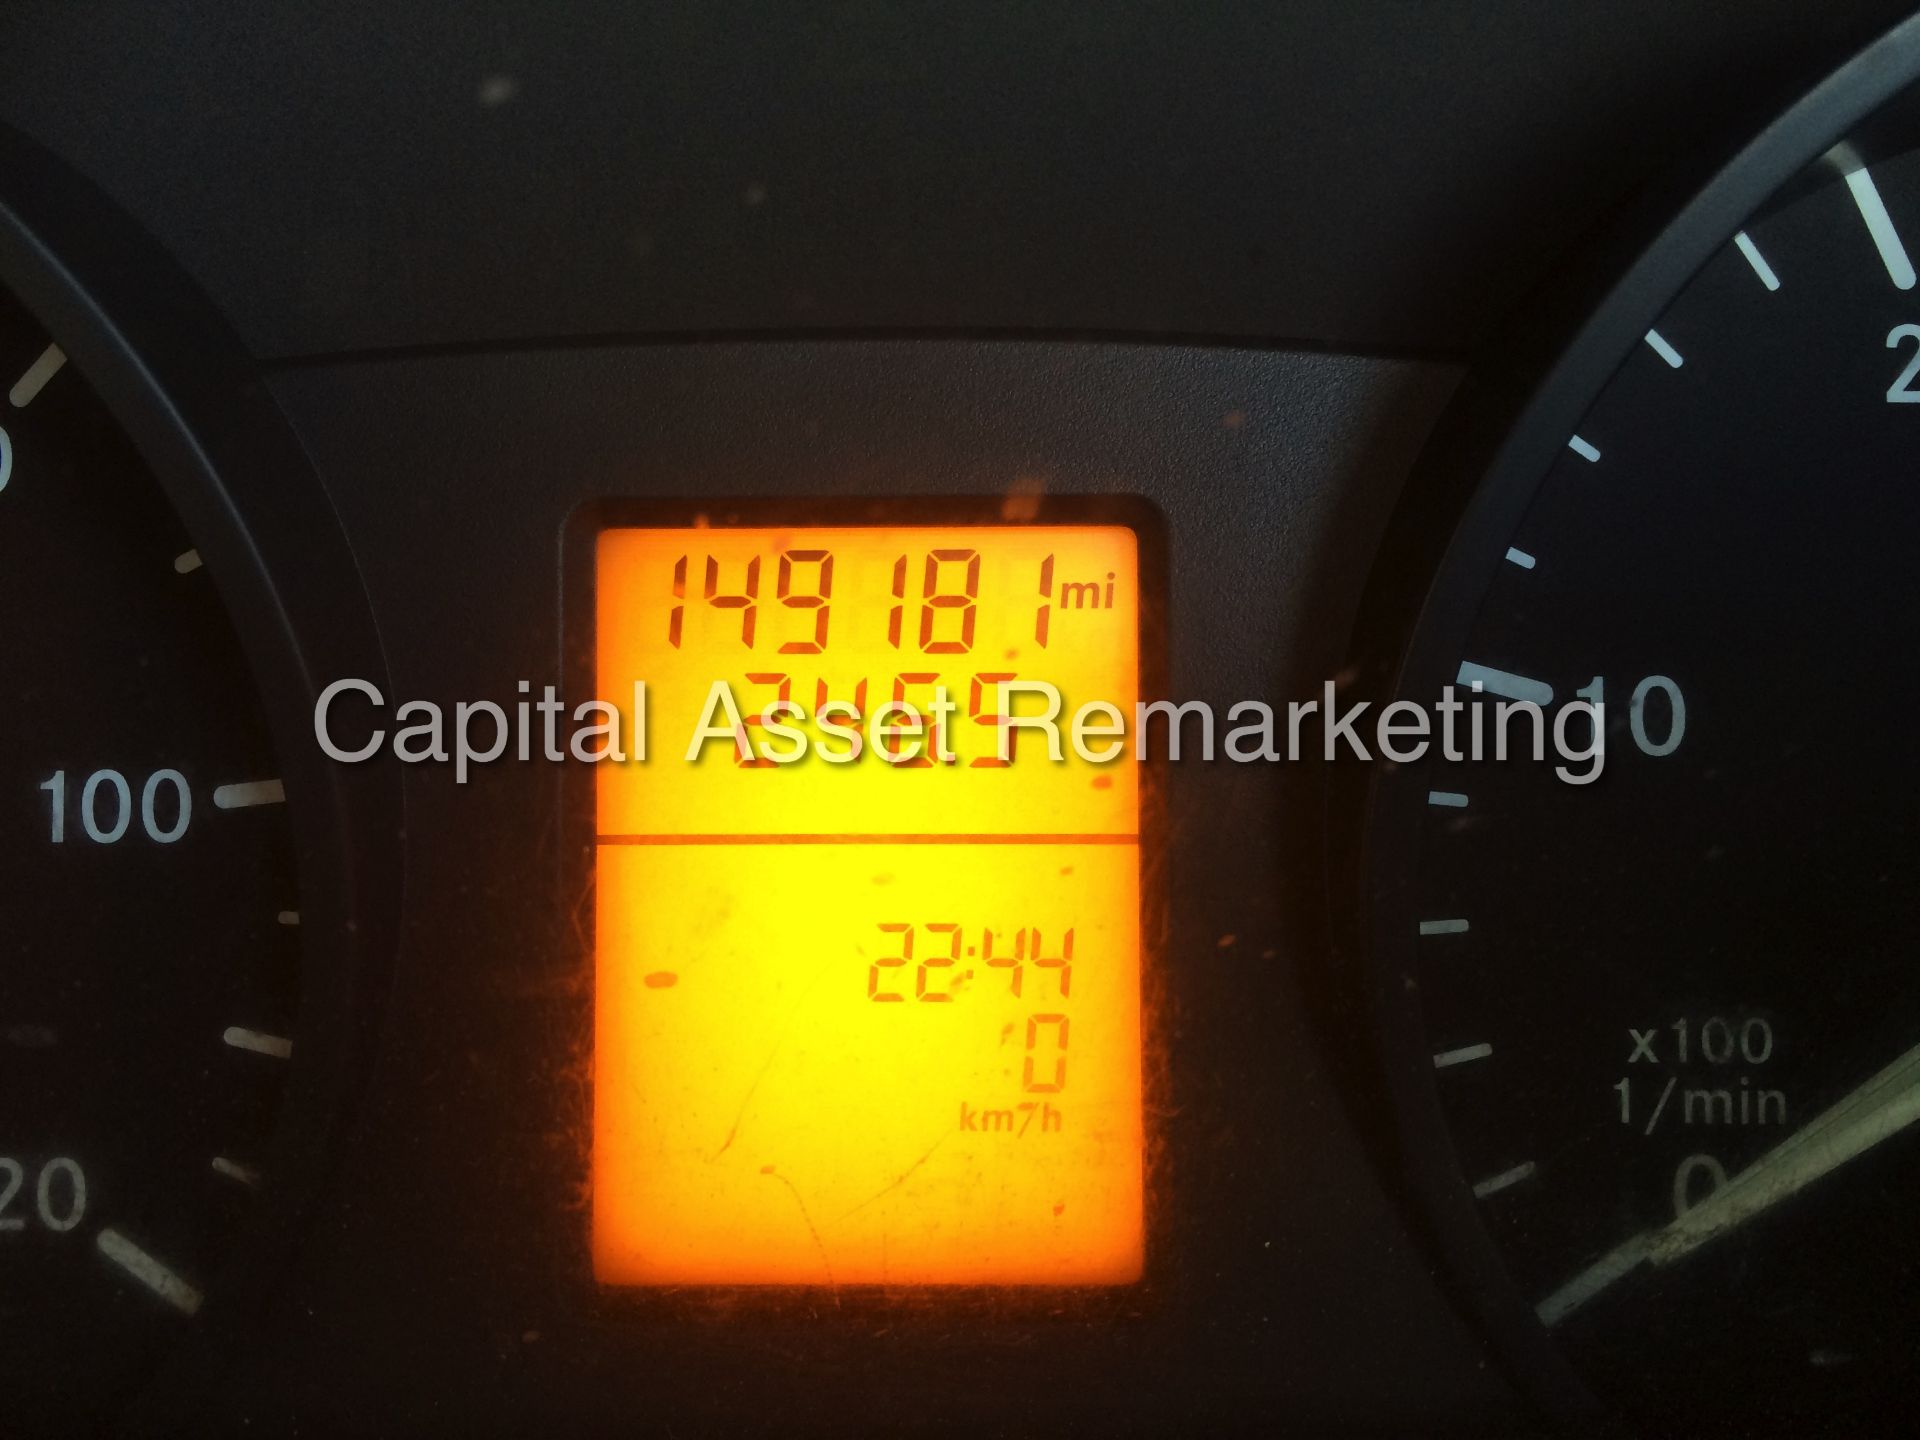 (ON SALE) MERCEDES SPRINTER 311CDI "110BHP - 6 SPEED" (2008 YEAR) LWB - SERVICE REPORTS / LOW MILAGE - Image 10 of 11